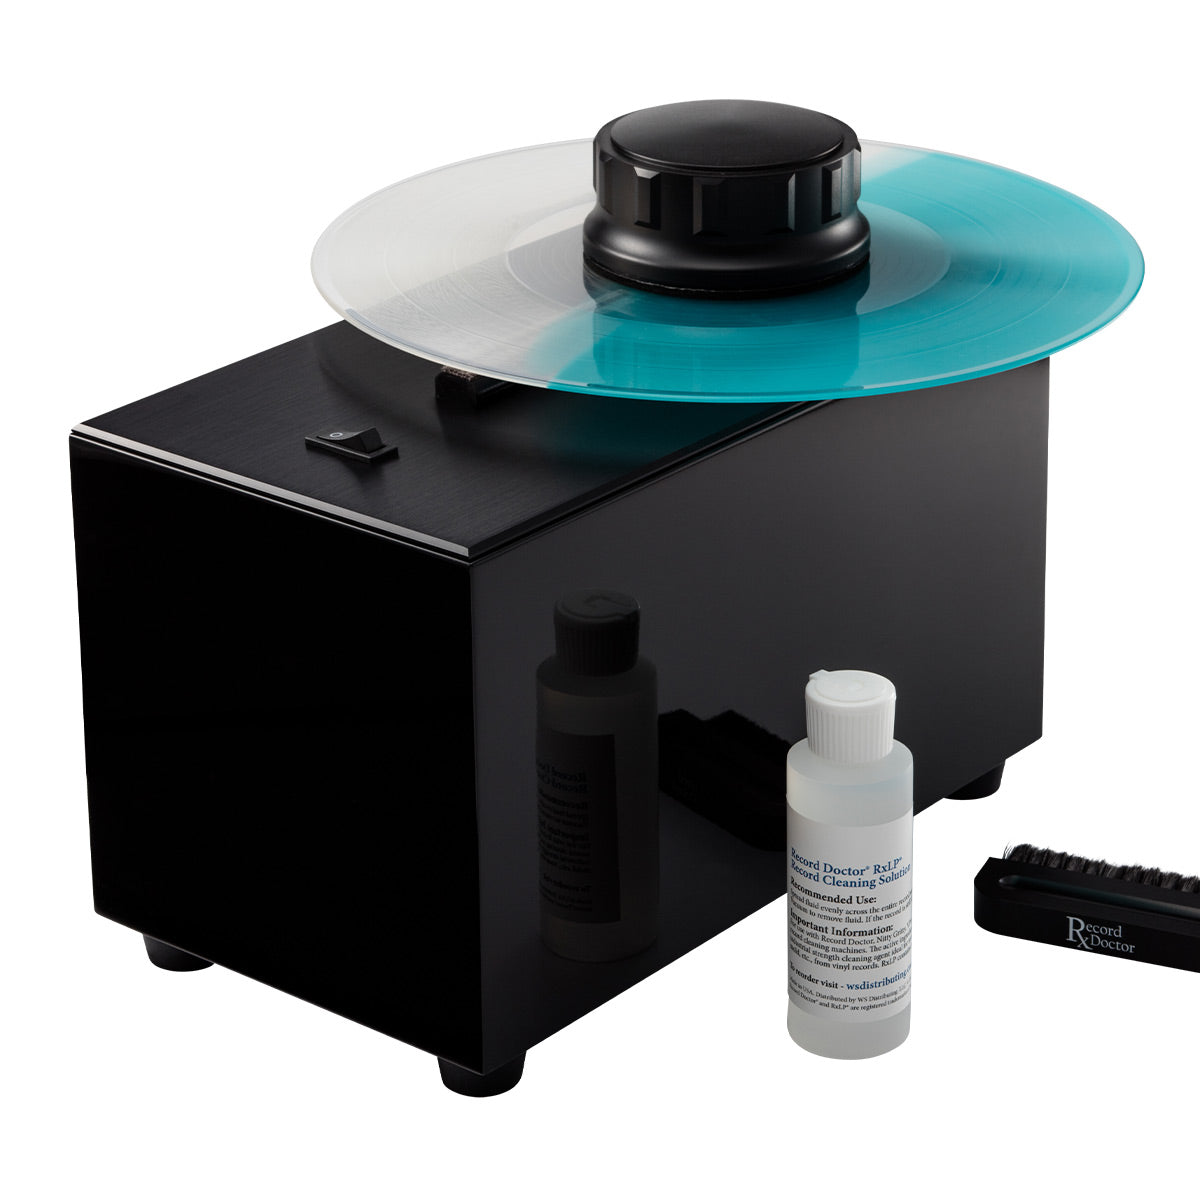 Record Doctor VI Record Cleaning Machine with RxLP Cleaning Solution 20th Anniversary Edition (Gloss Black)